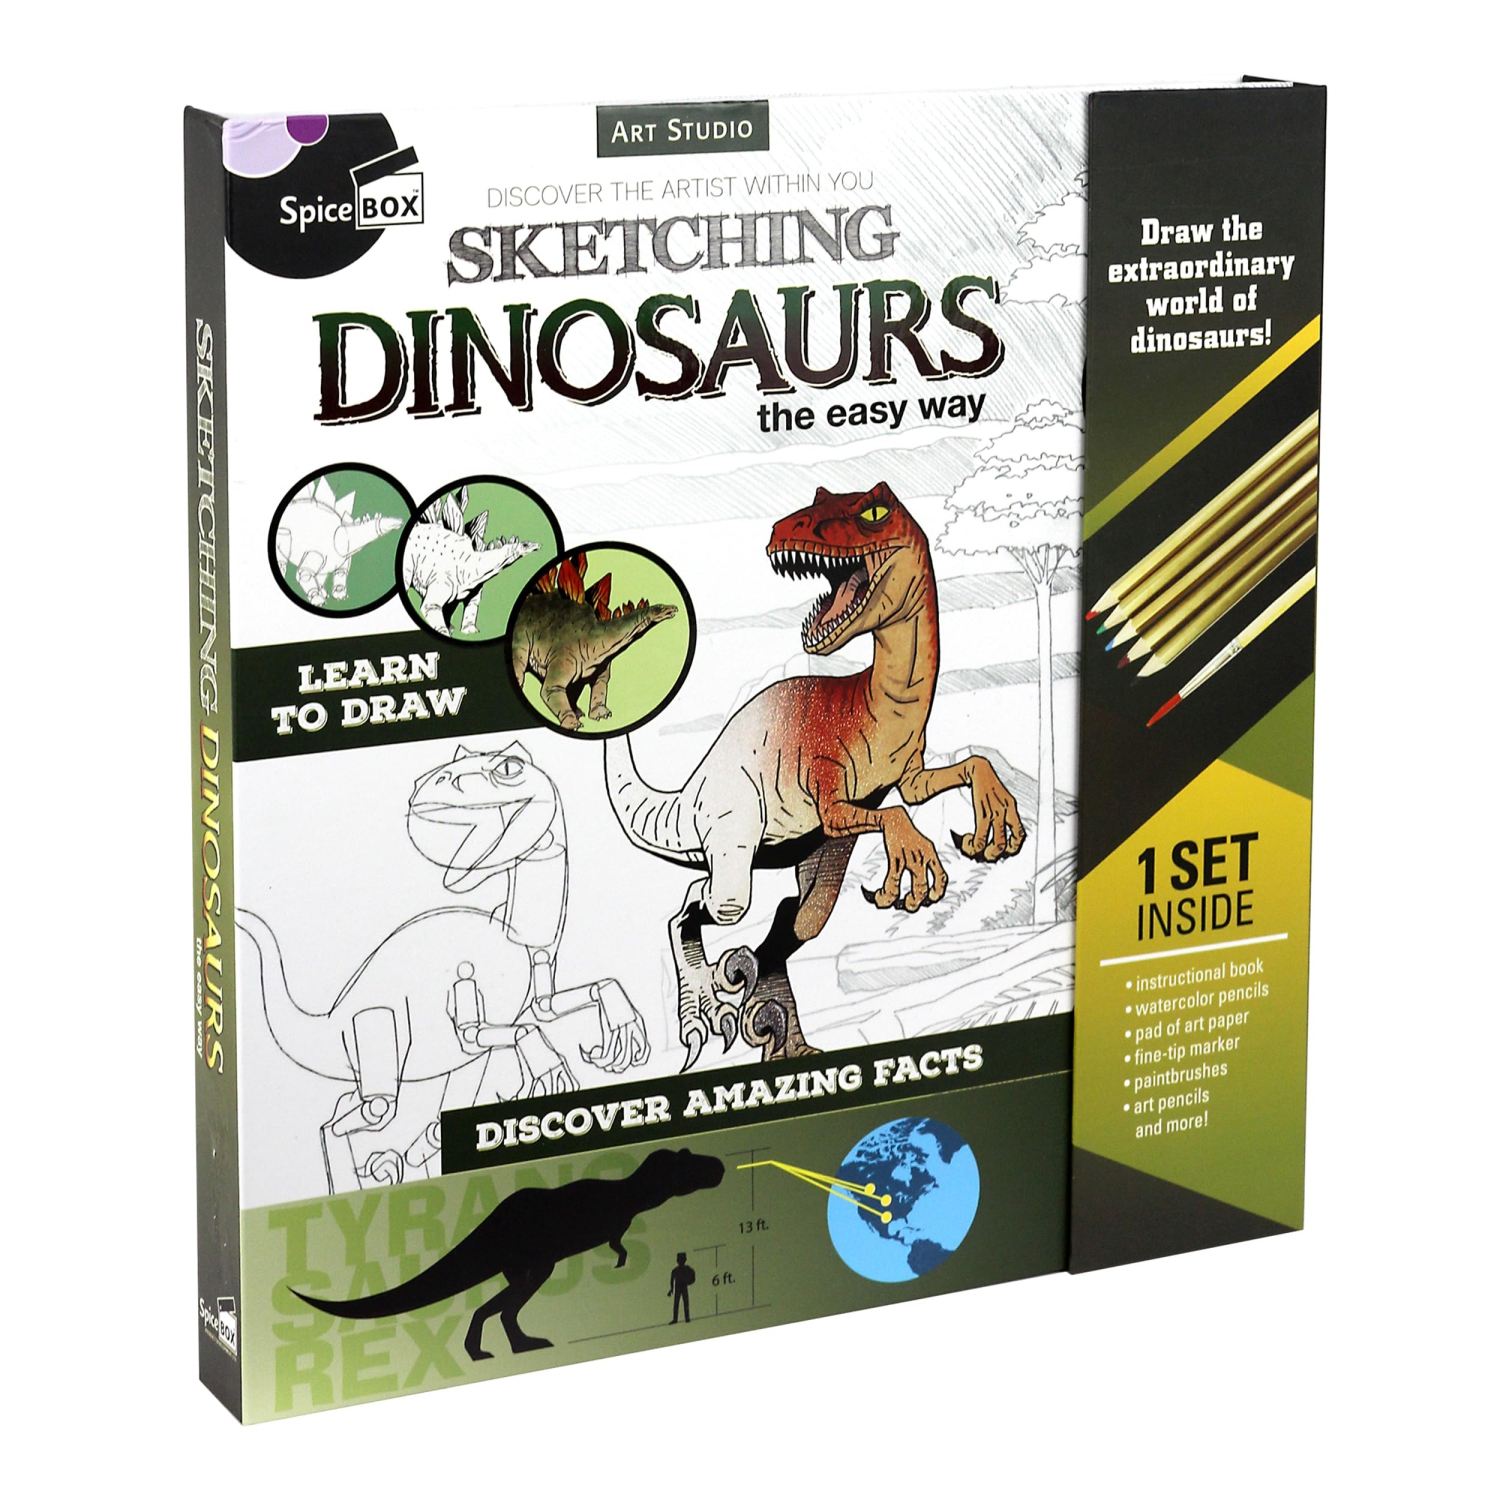 DinoSketch: Fun and Educational Dinosaur Drawing Kit for Kids, Teens, and Tweens - Learn to Draw Books with Complete Sketching Supplies - Inspire Creativity with this Art Hobby Kit